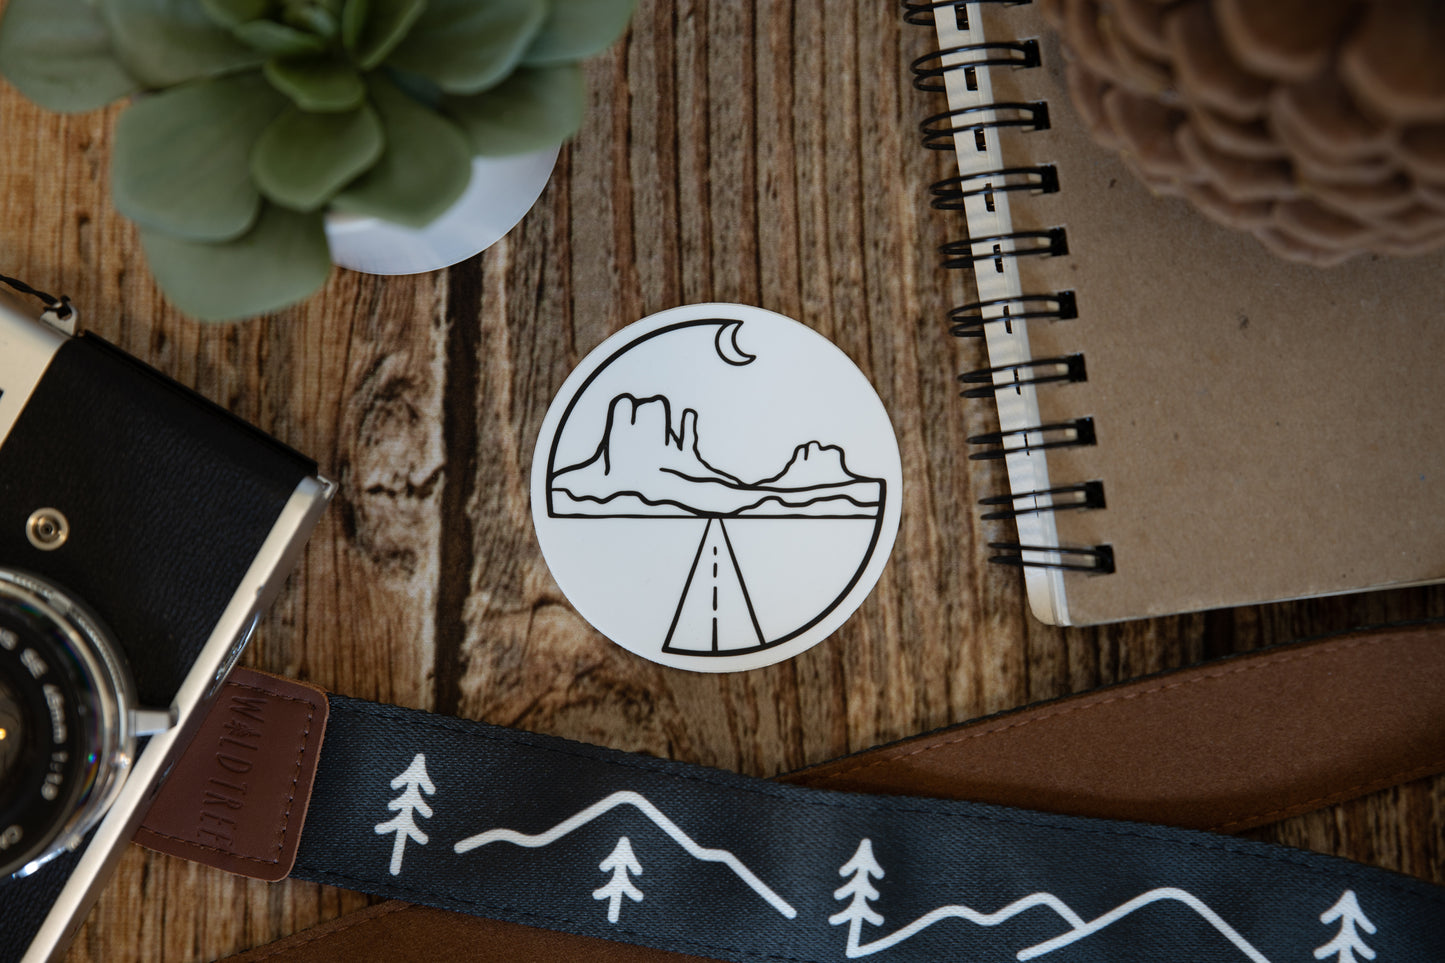 Circle Monument valley sticker on wood background surrounded by notebook, camera and succulent